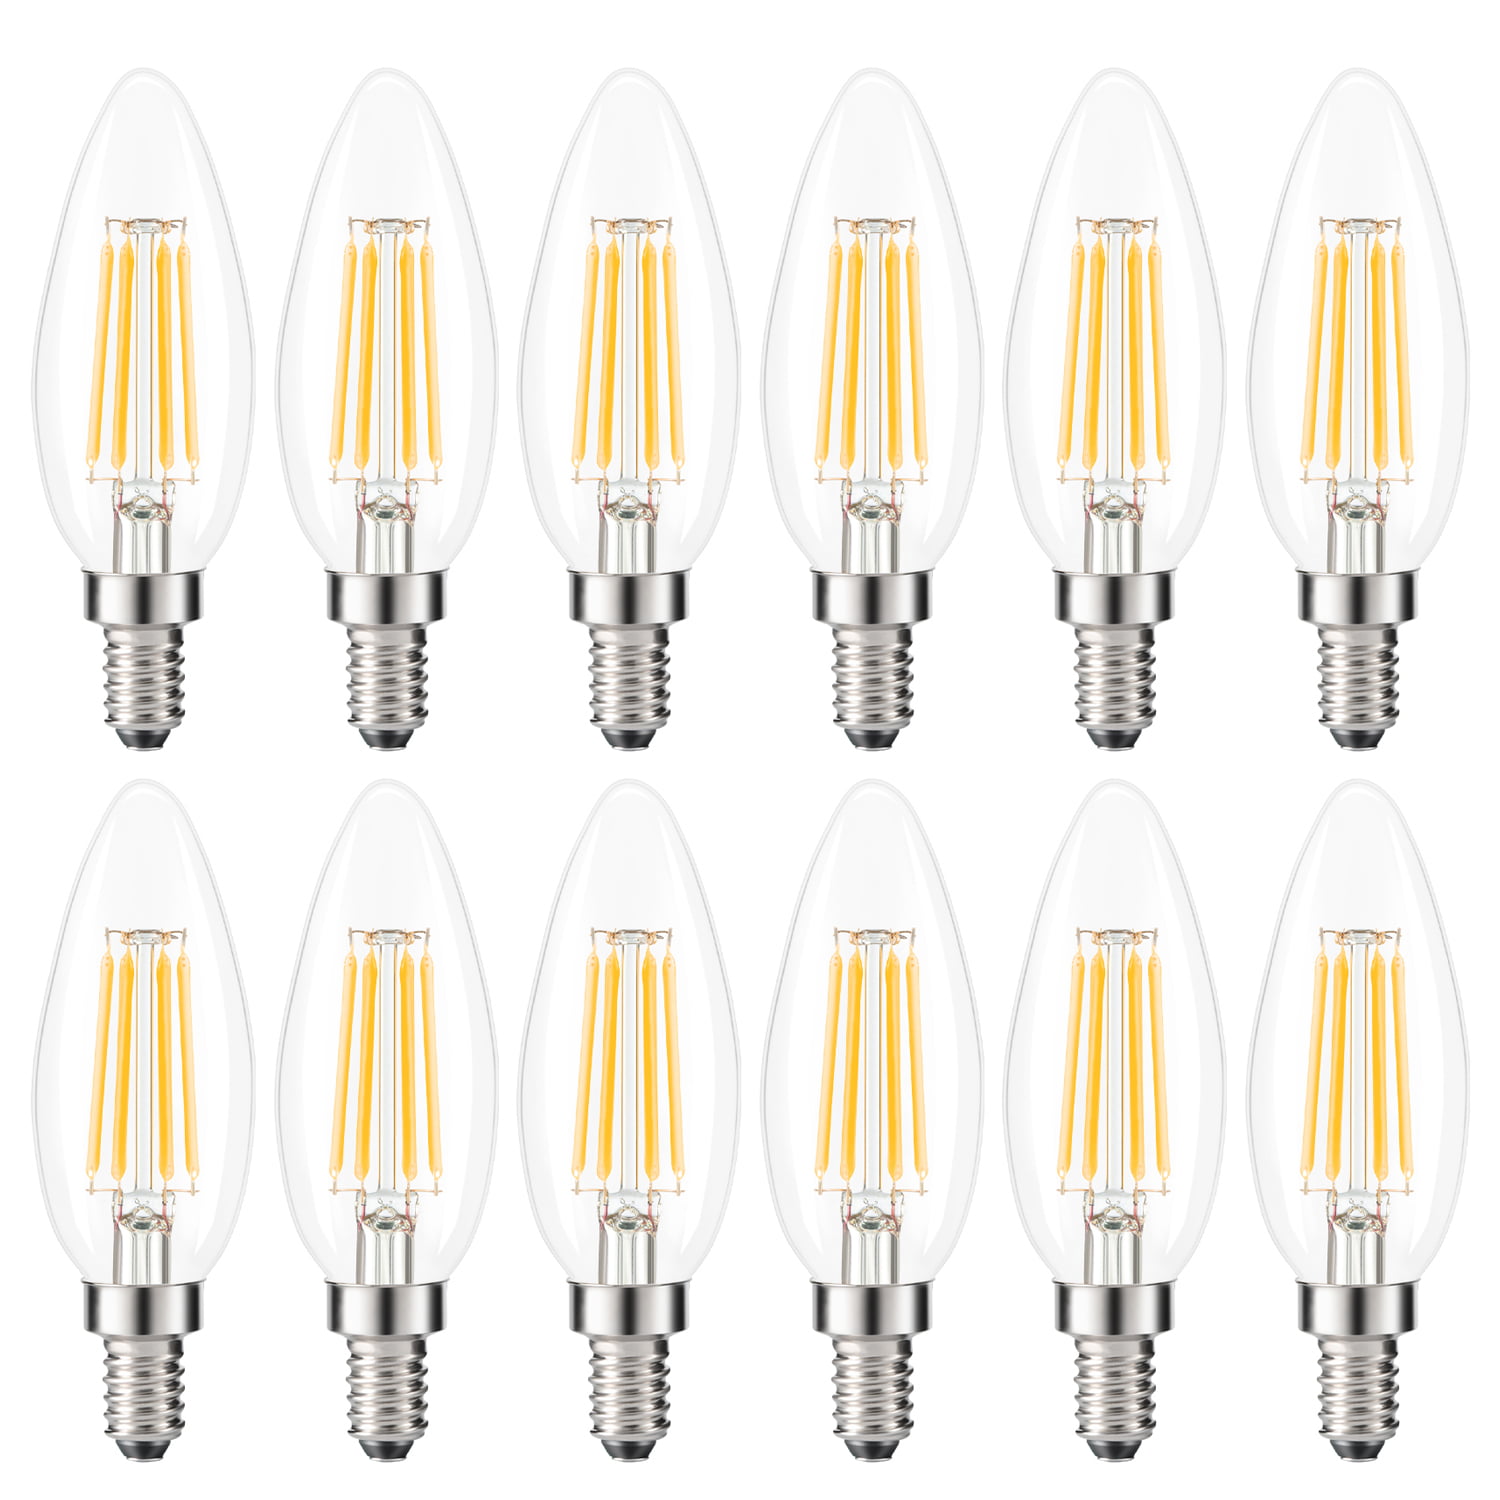 12x MaxLite LED Chandelier Bulbs 4W 40W Enclosed Fixture Rated Dimmable E12 